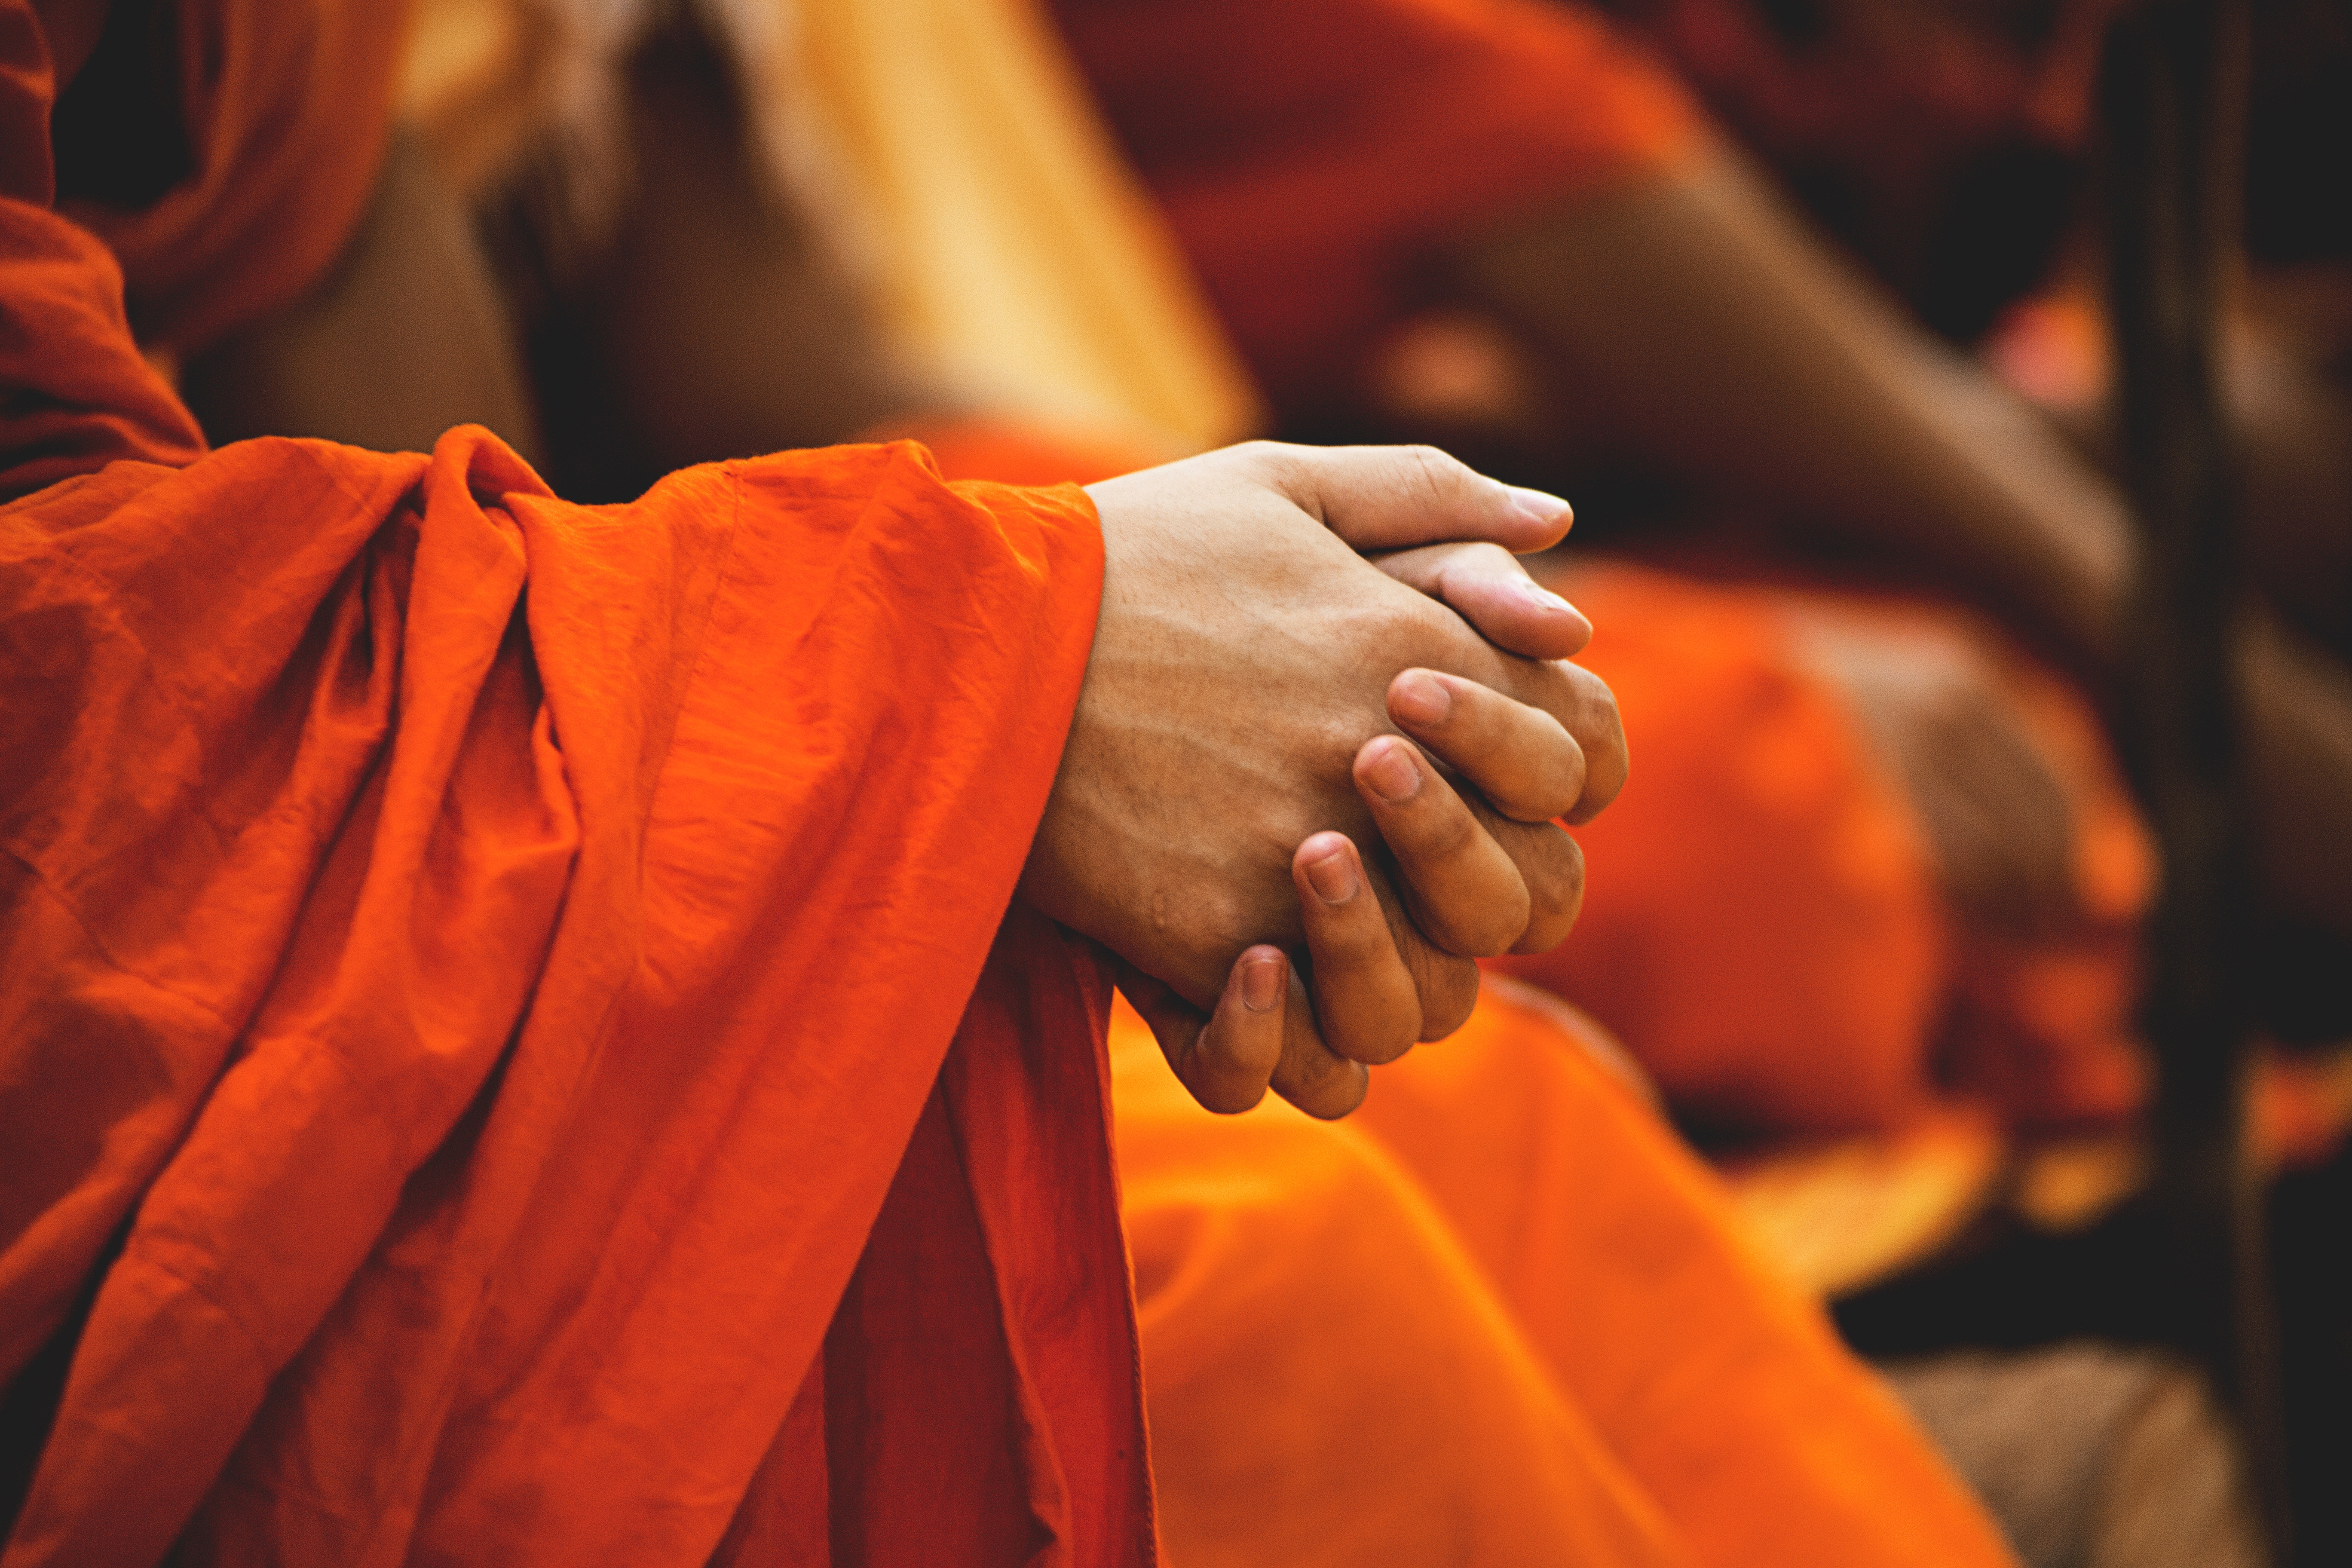 Wallpaper for mobile devices hands, miscellanea, buddhist, monk